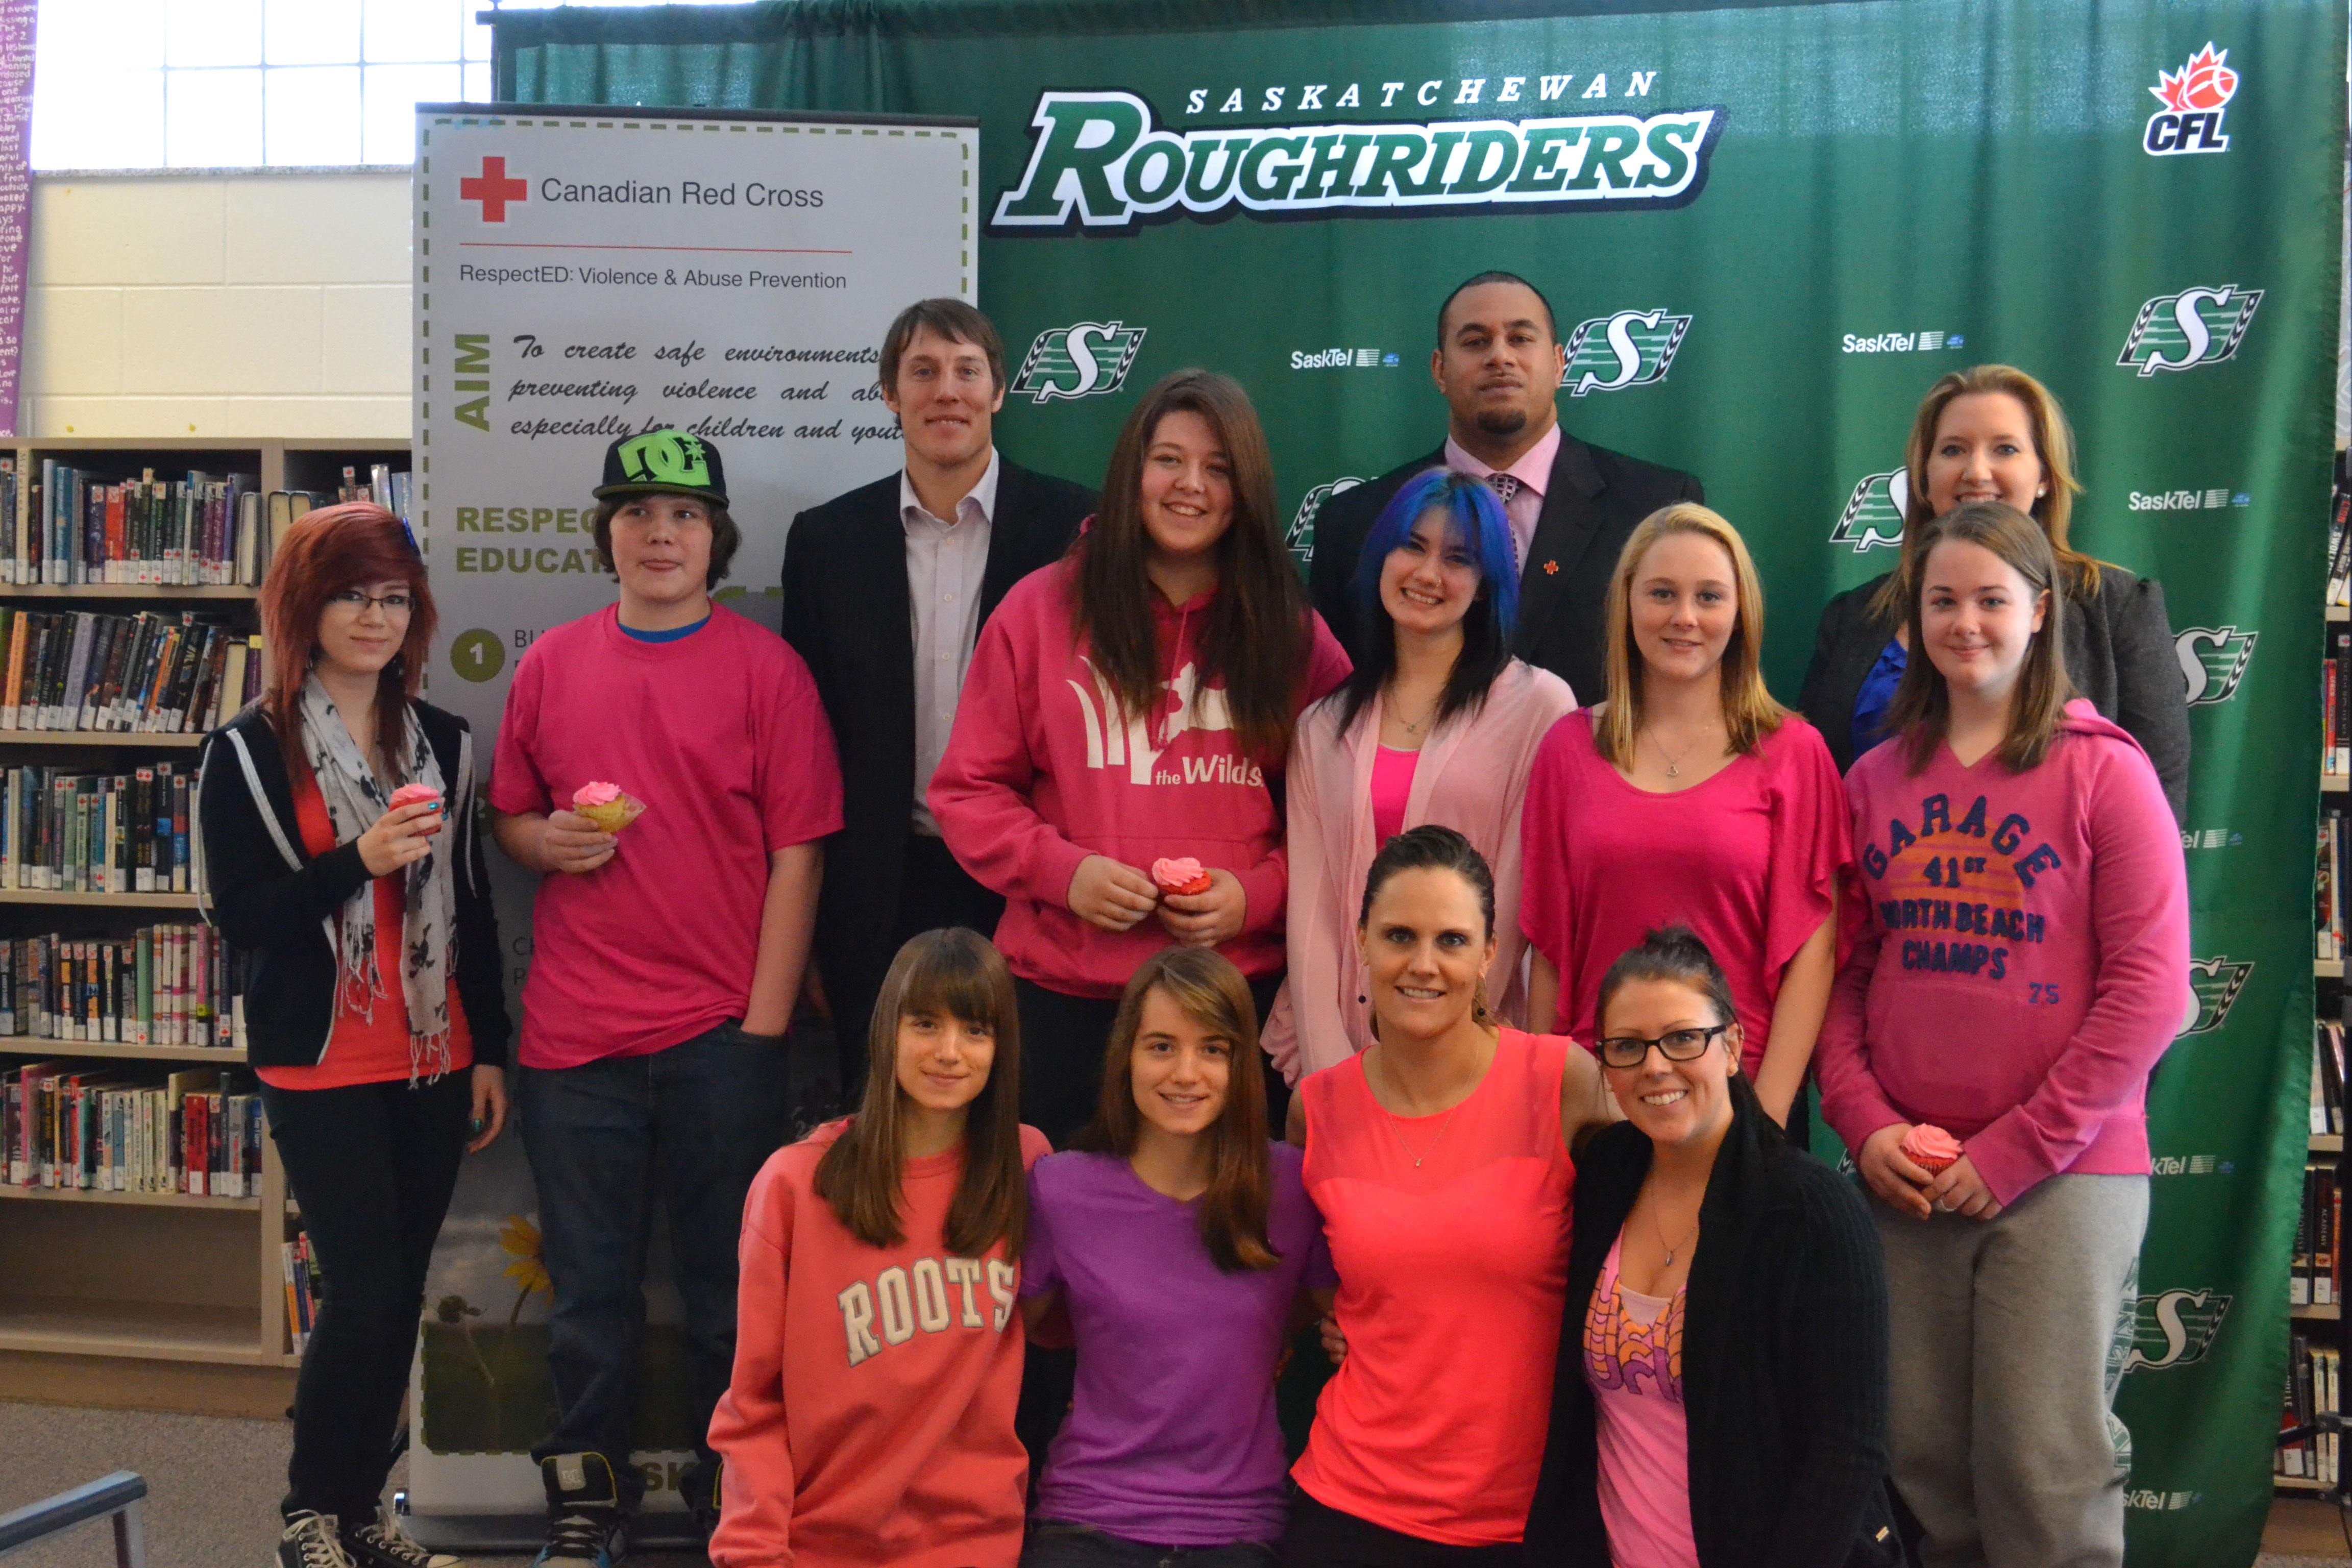 Saskatchewan Roughriders partner with Canadian Red Cross